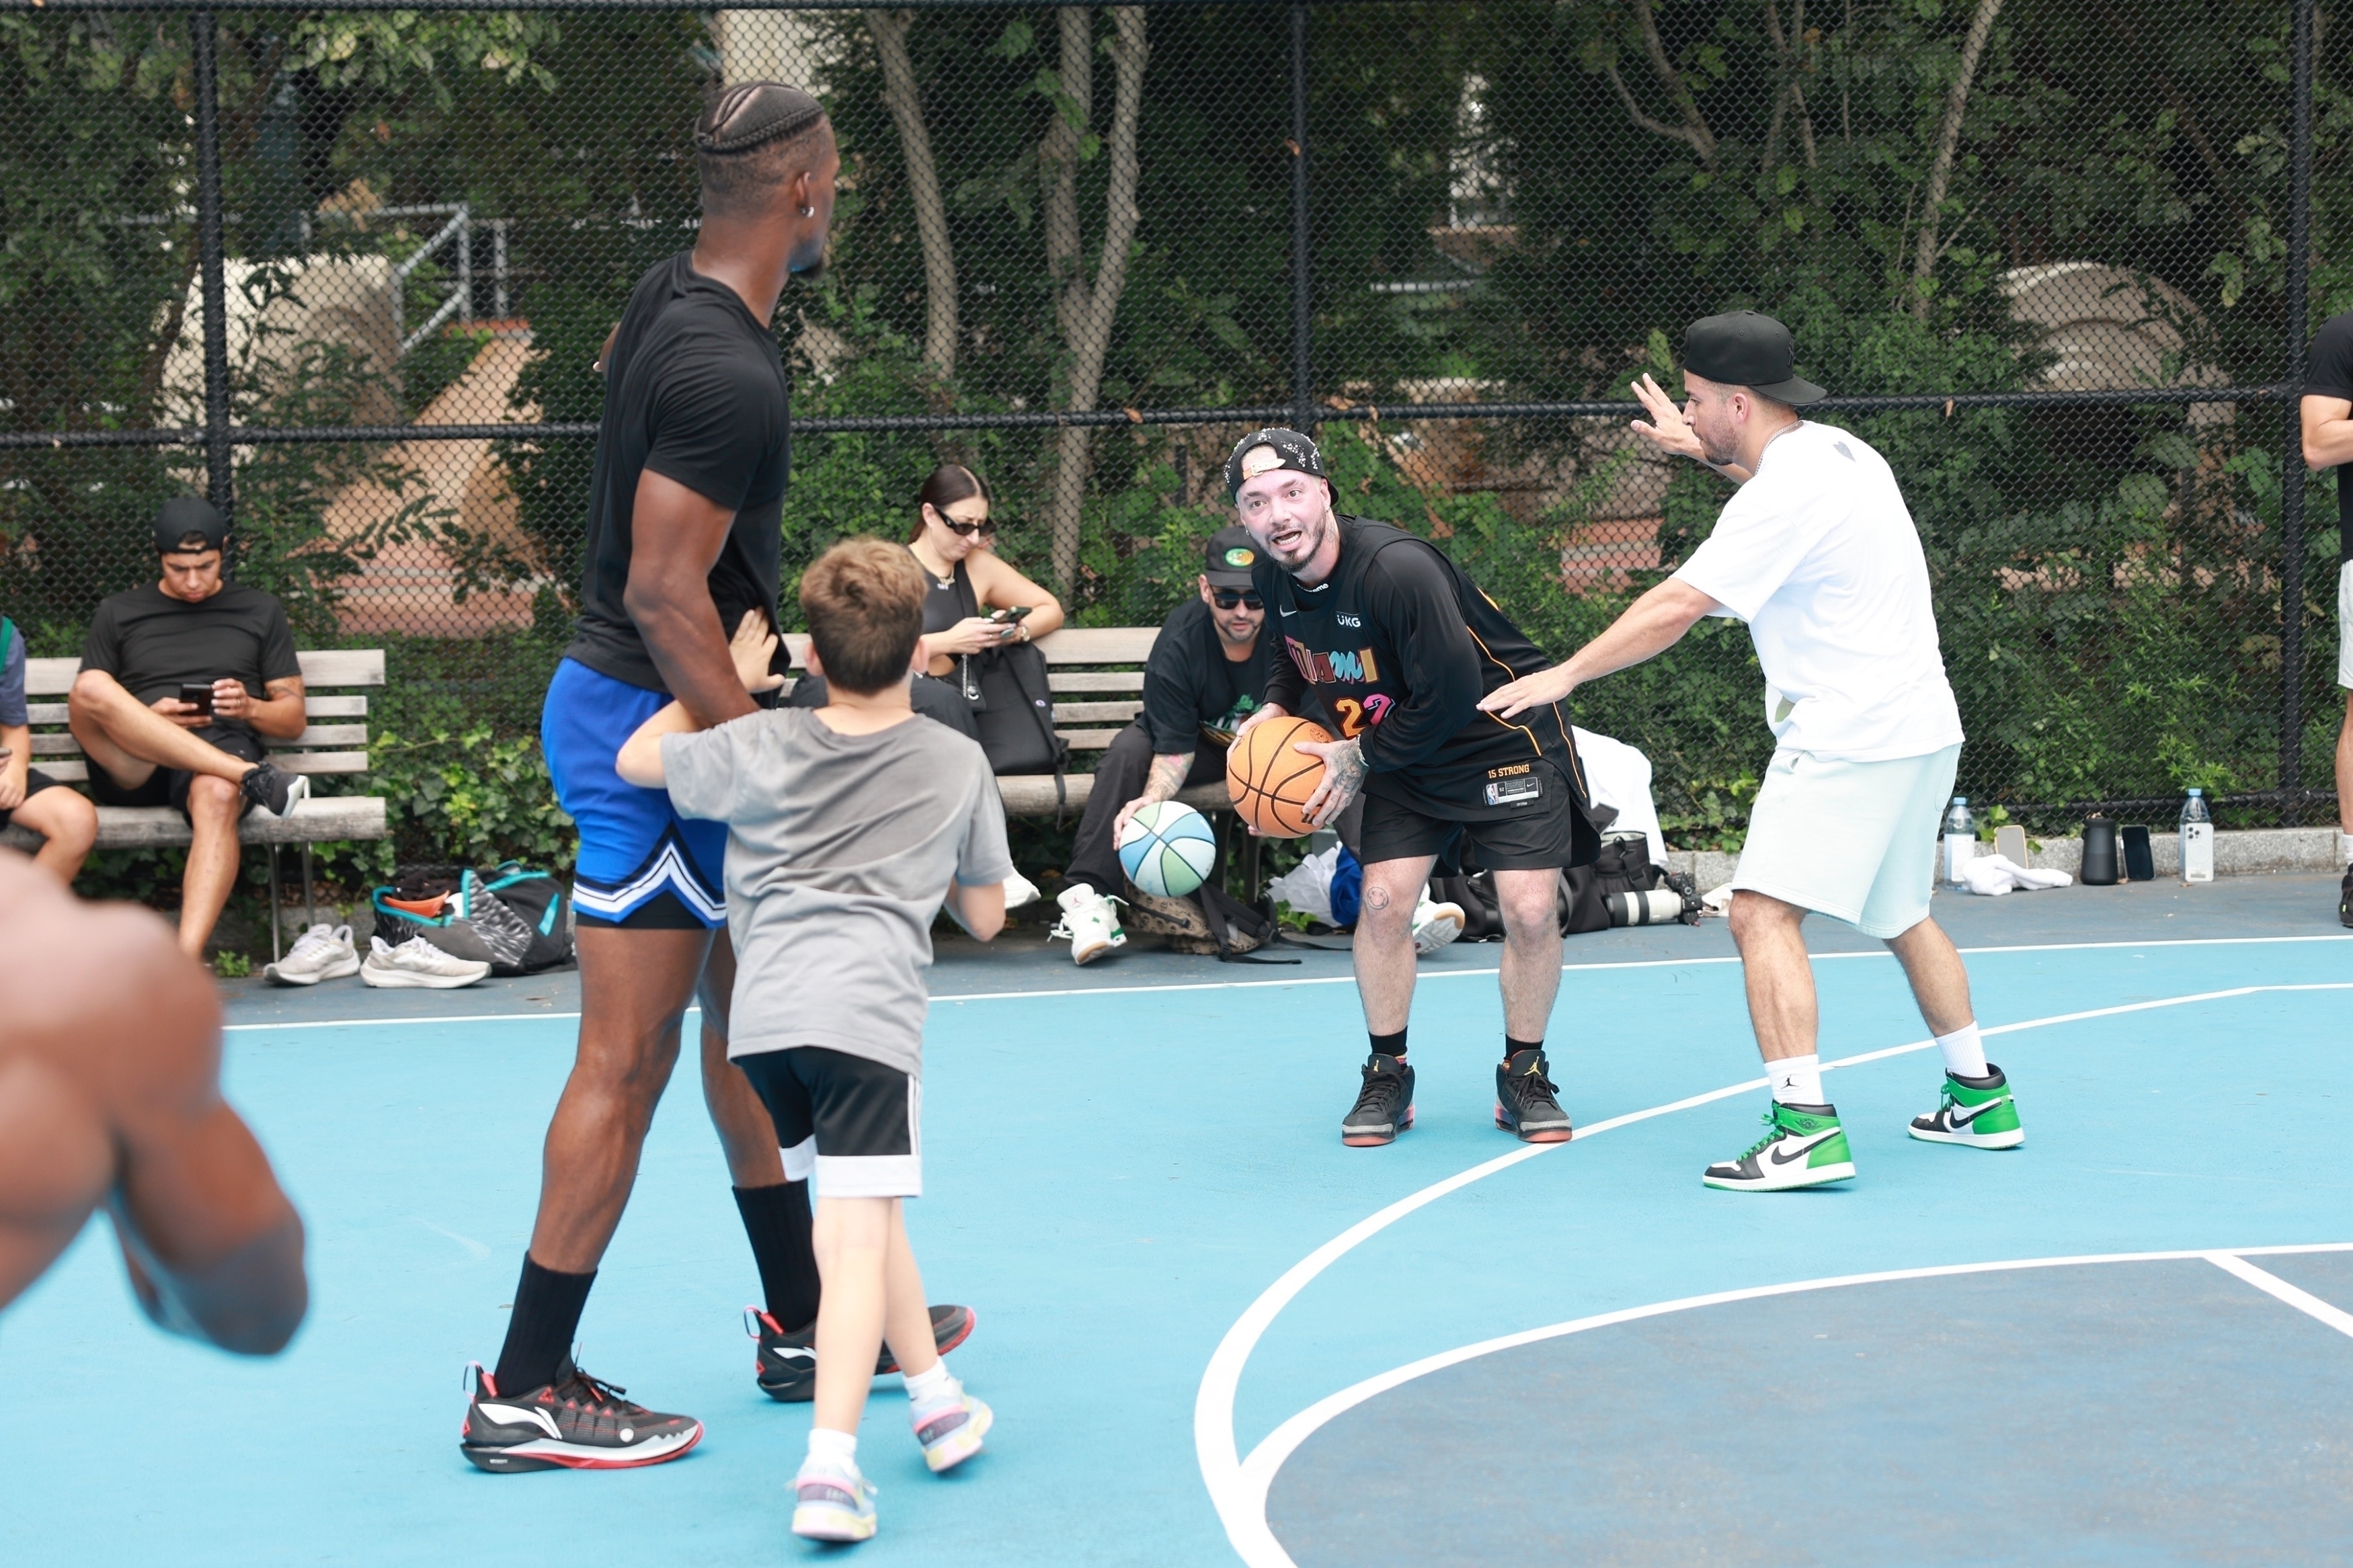 J.Balvin wears his unreleased Air Jordan 3 "Rio" shoes while playing basketball in New York with Jimmy Butler